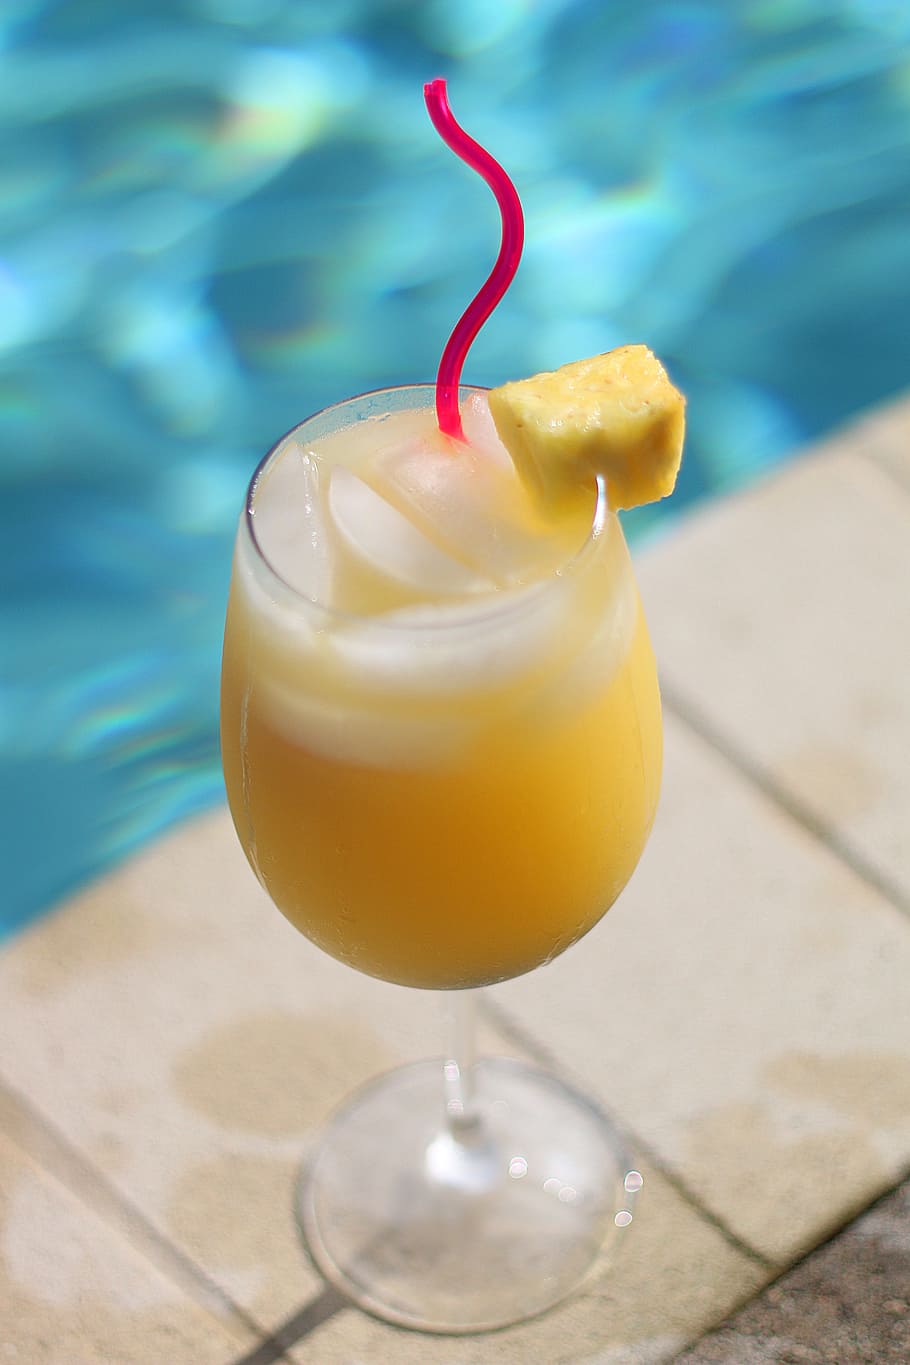 clear, long-stemmed, wine glass, filled, yellow, liquid, summer, cocktail, mimosa, drink